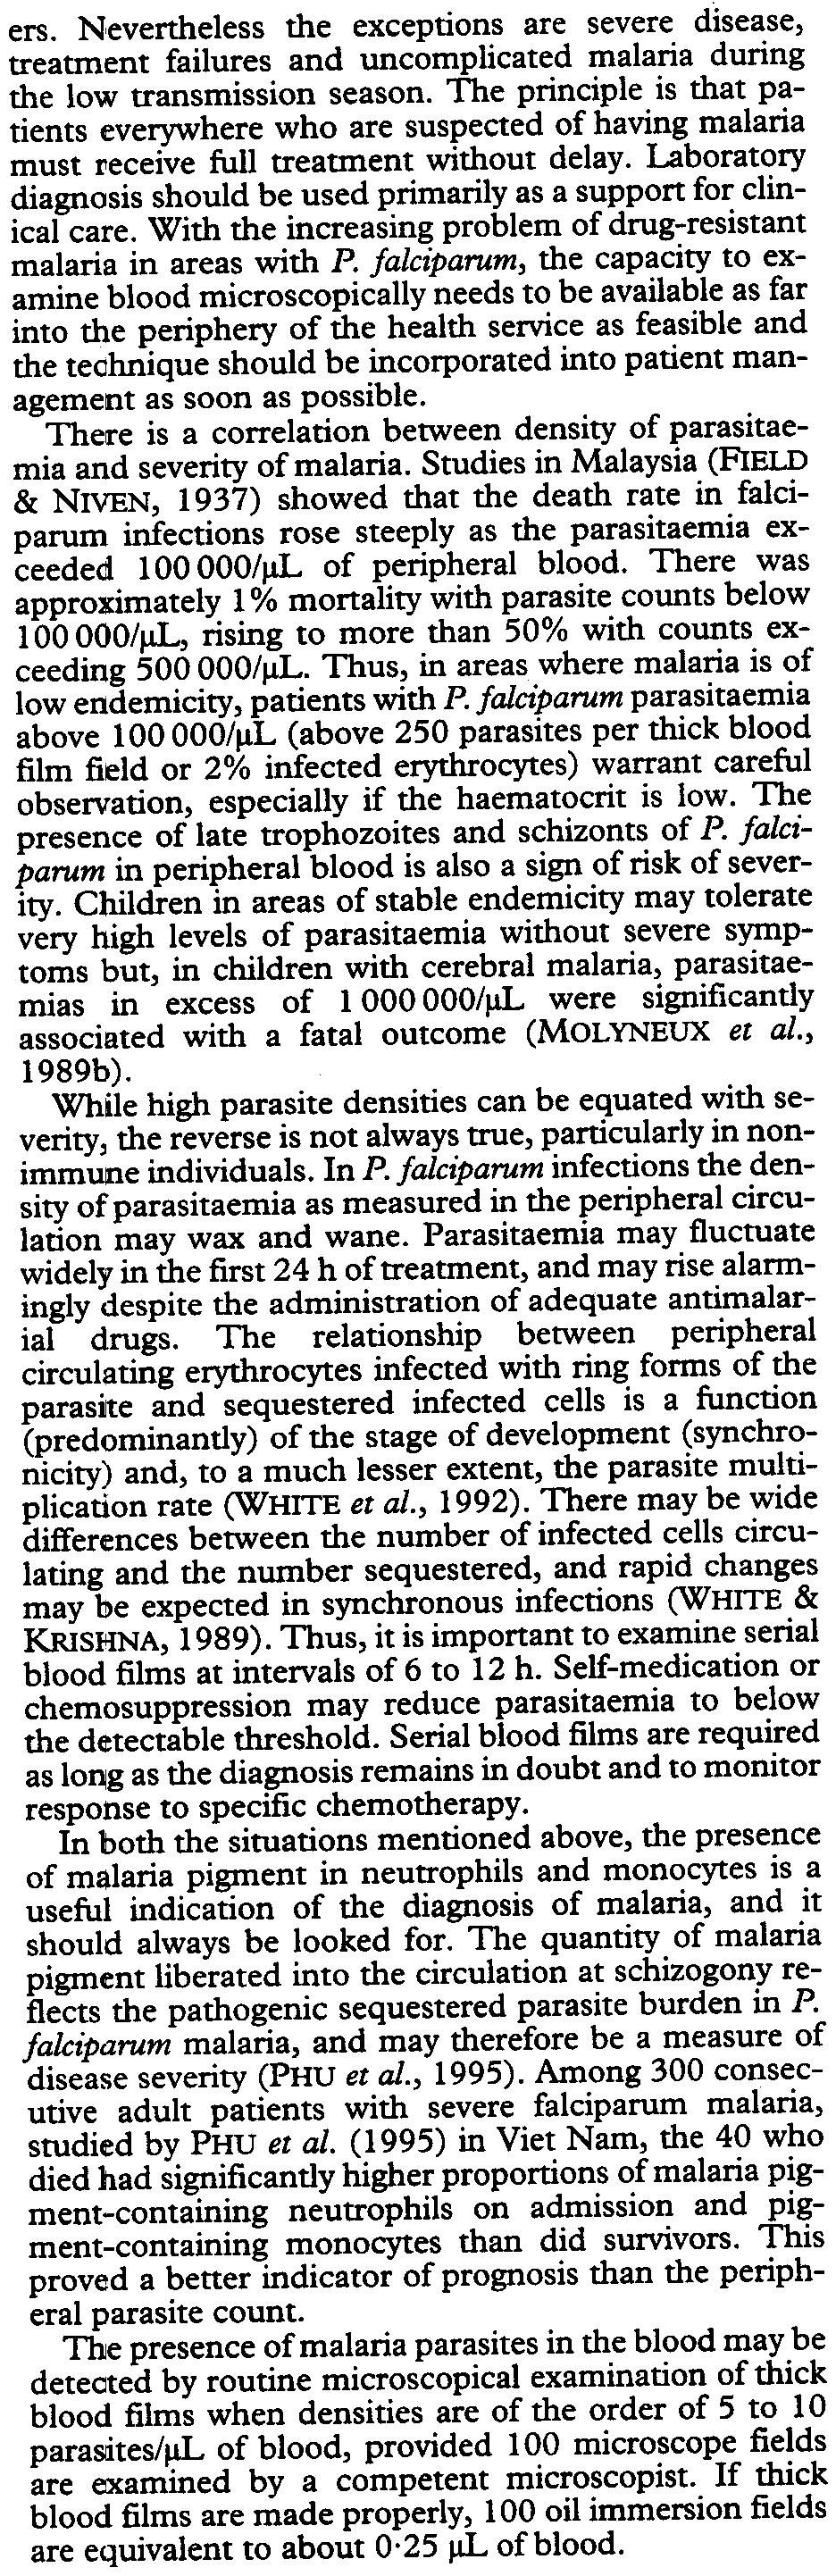 TRANS".CTIONS OFTHE ROYAL SOCIETY OF TROPICAL MEDICINE AND HYGIENE (2000) 94, SUPPLEMENT 1 Sl/33 ers.